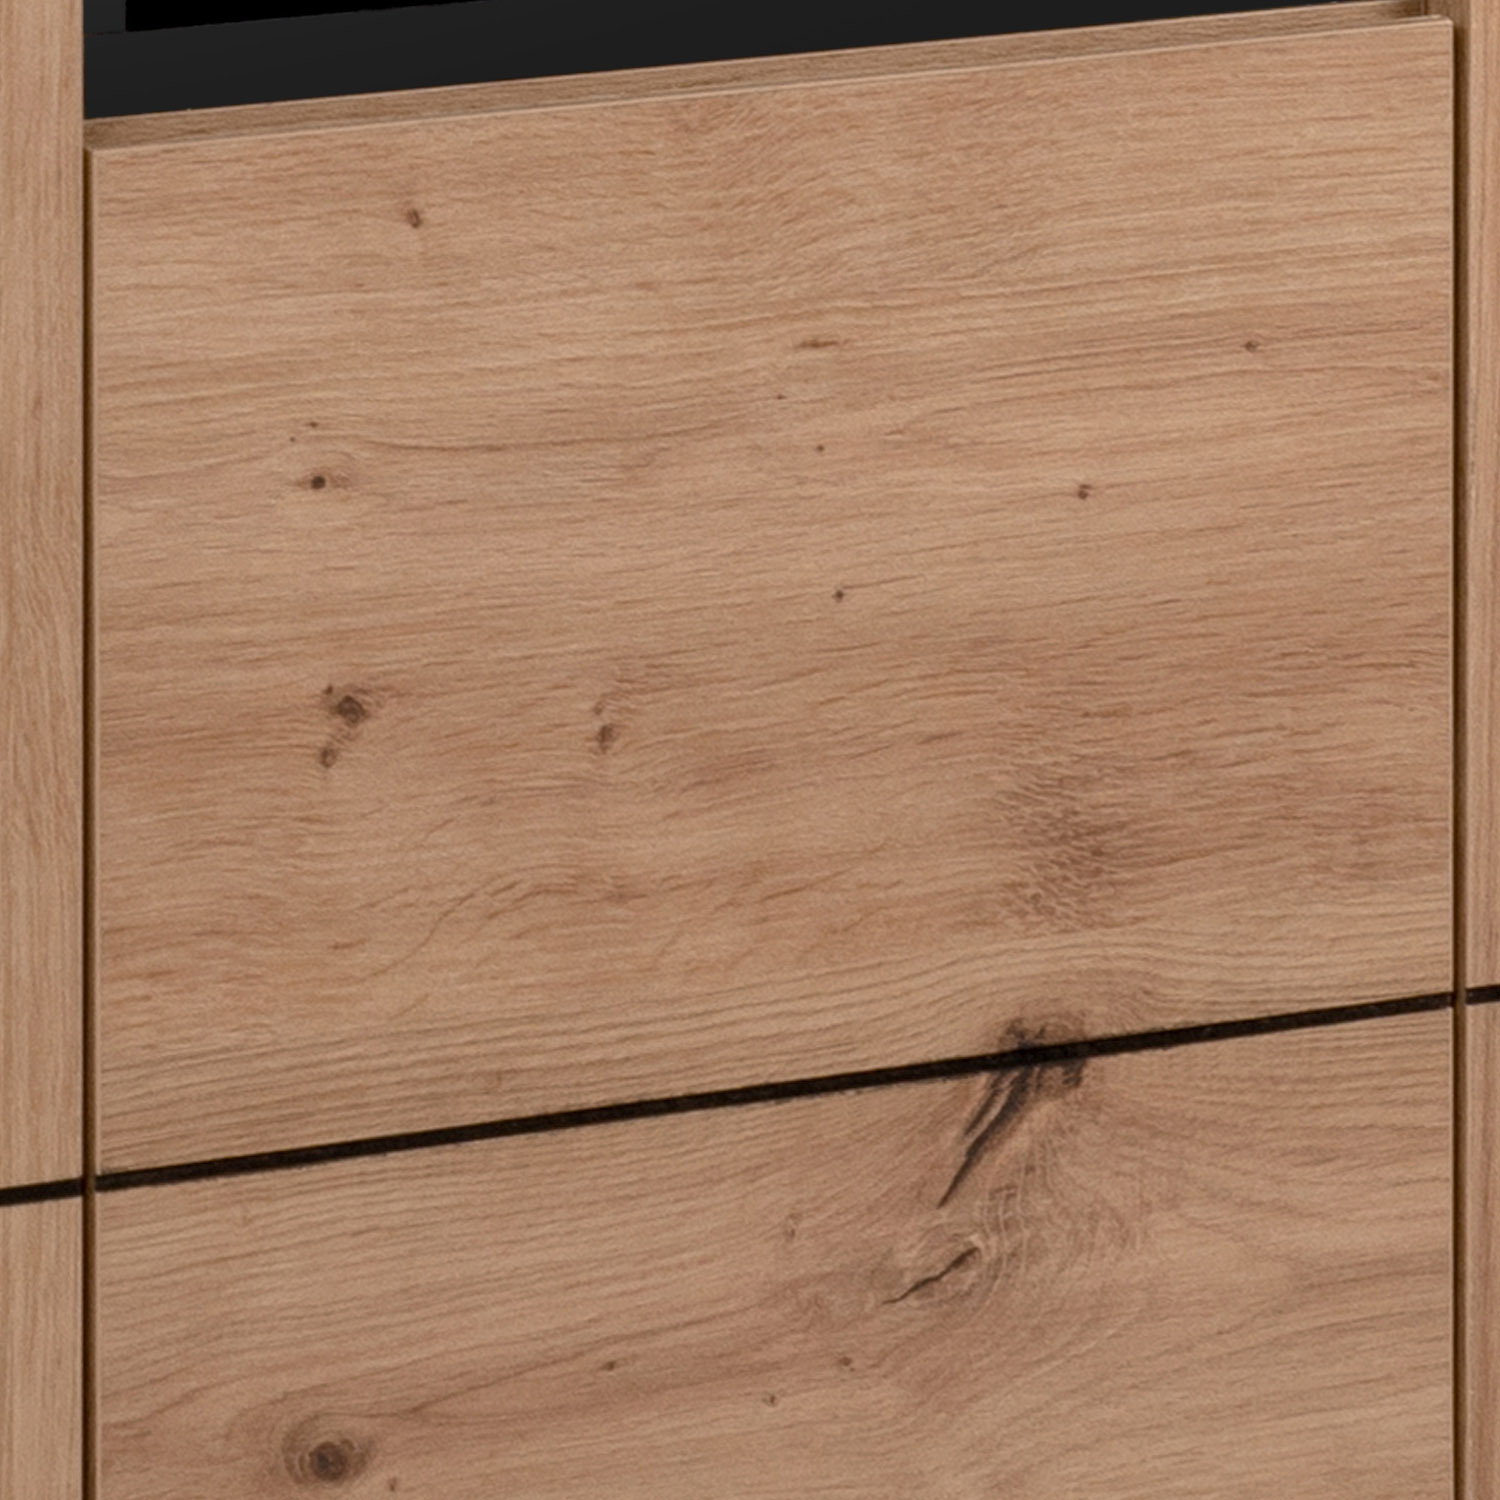 Sideboard Chest of Drawers Oak Wood in Natural Black Living Room Cabinet